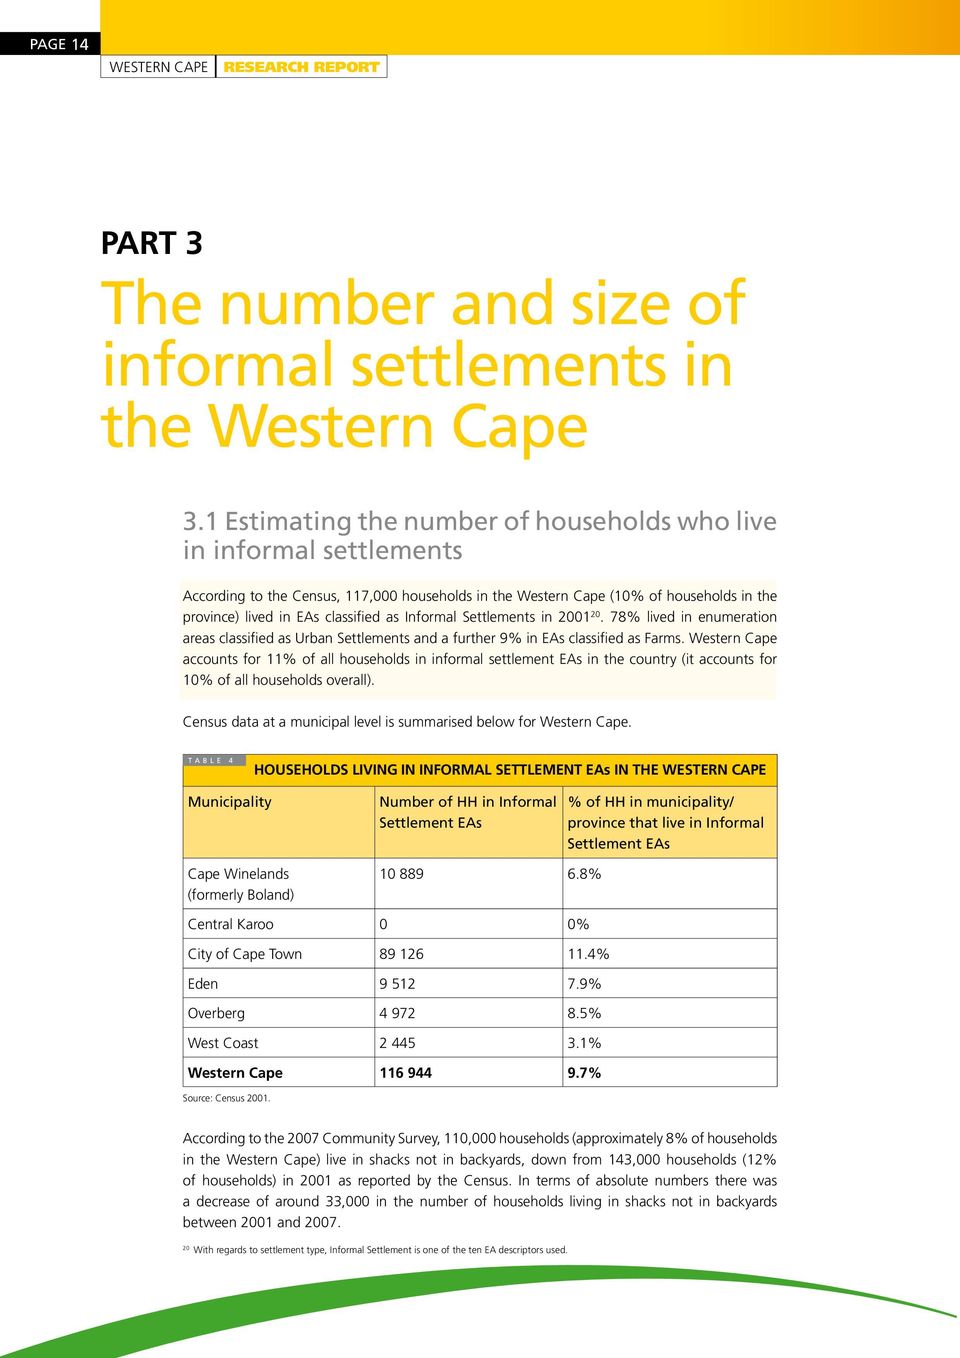 Informal Settlements in 2001 20. 78% lived in enumeration areas classified as Urban Settlements and a further 9% in EAs classified as Farms.